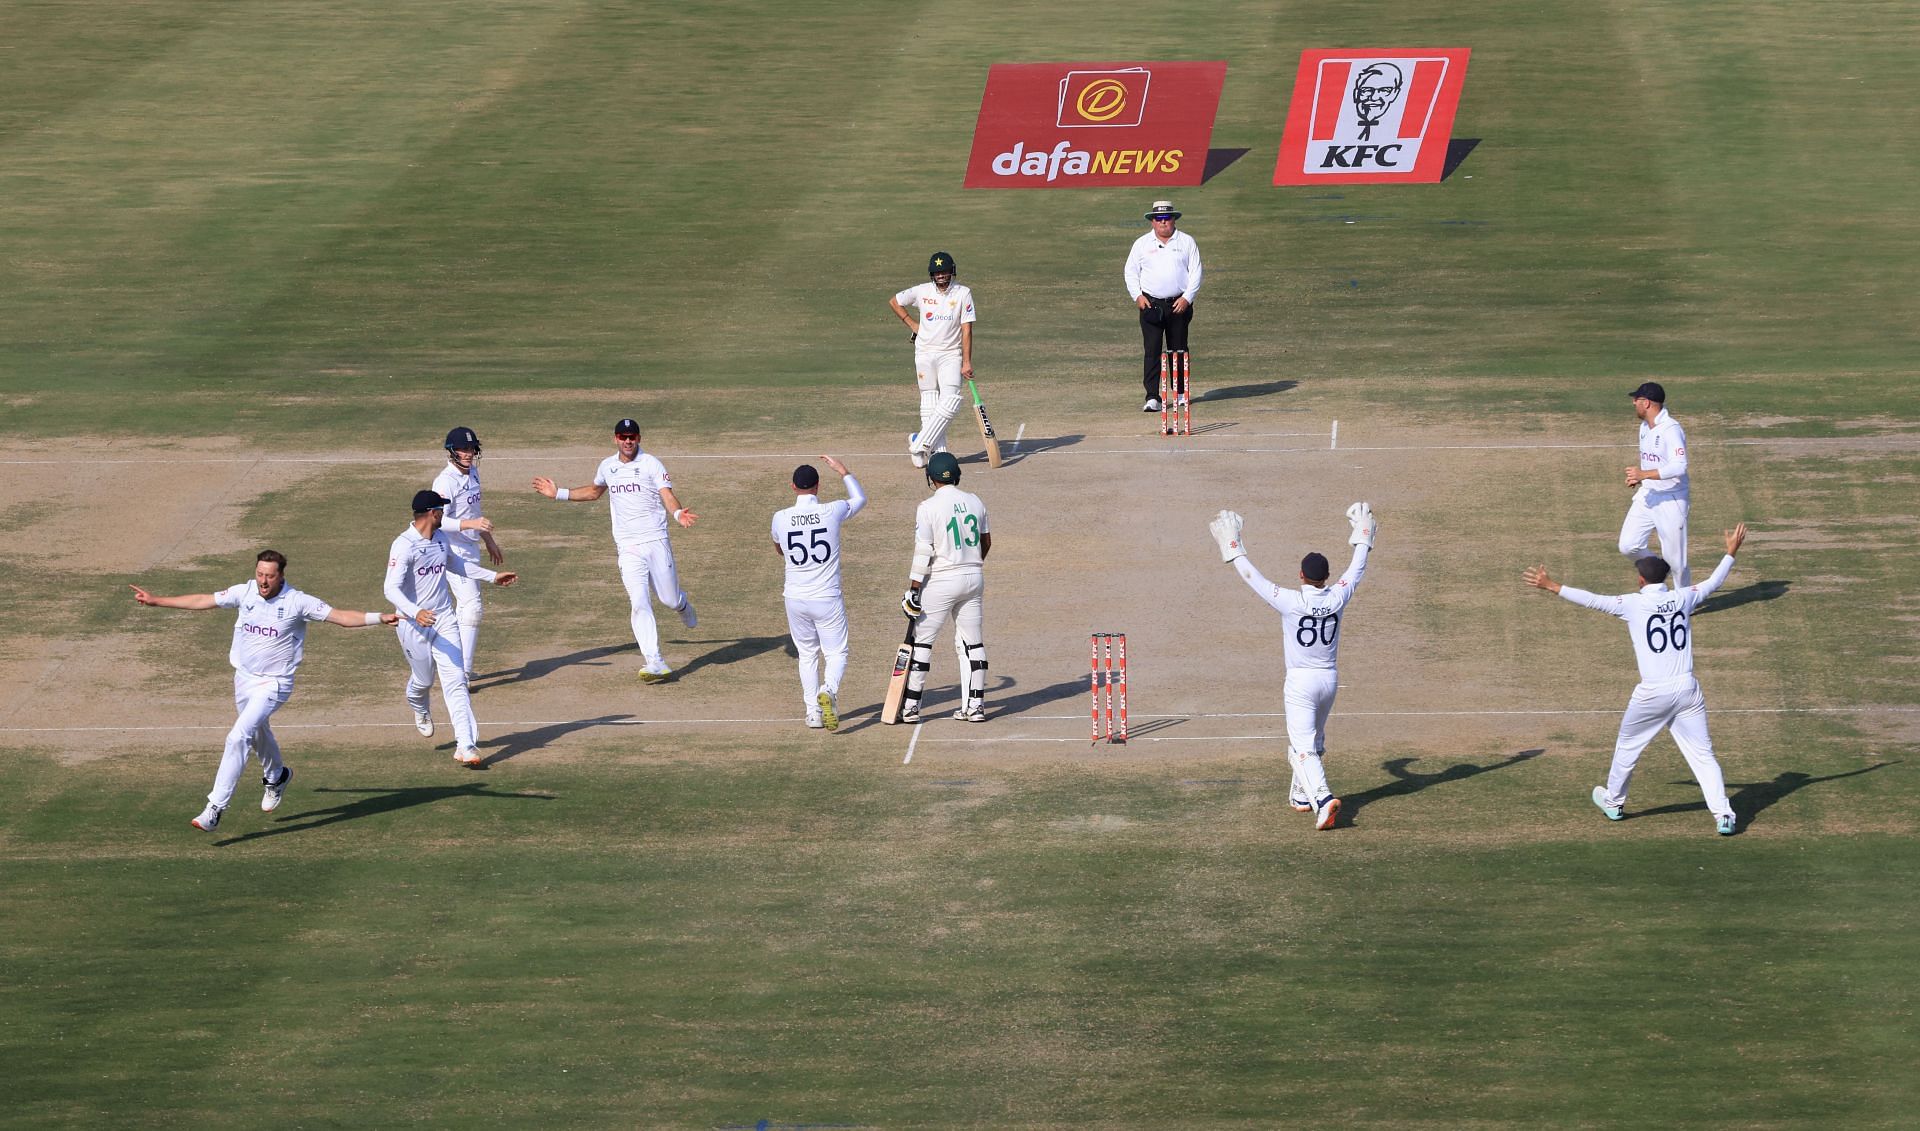 Pakistan v England - Second Test Match: Day Four MULTAN, PAKISTAN - DECEMBER 12: Ollie Robinson of England celebrates taking the final wicket of Mohammad Ali of Pakistan to win the Second Test Match between Pakistan and England at Multan Cricket Stadium on December 12, 2022 in Multan, Pakistan. (Photo by Matthew Lewis/Getty Images)